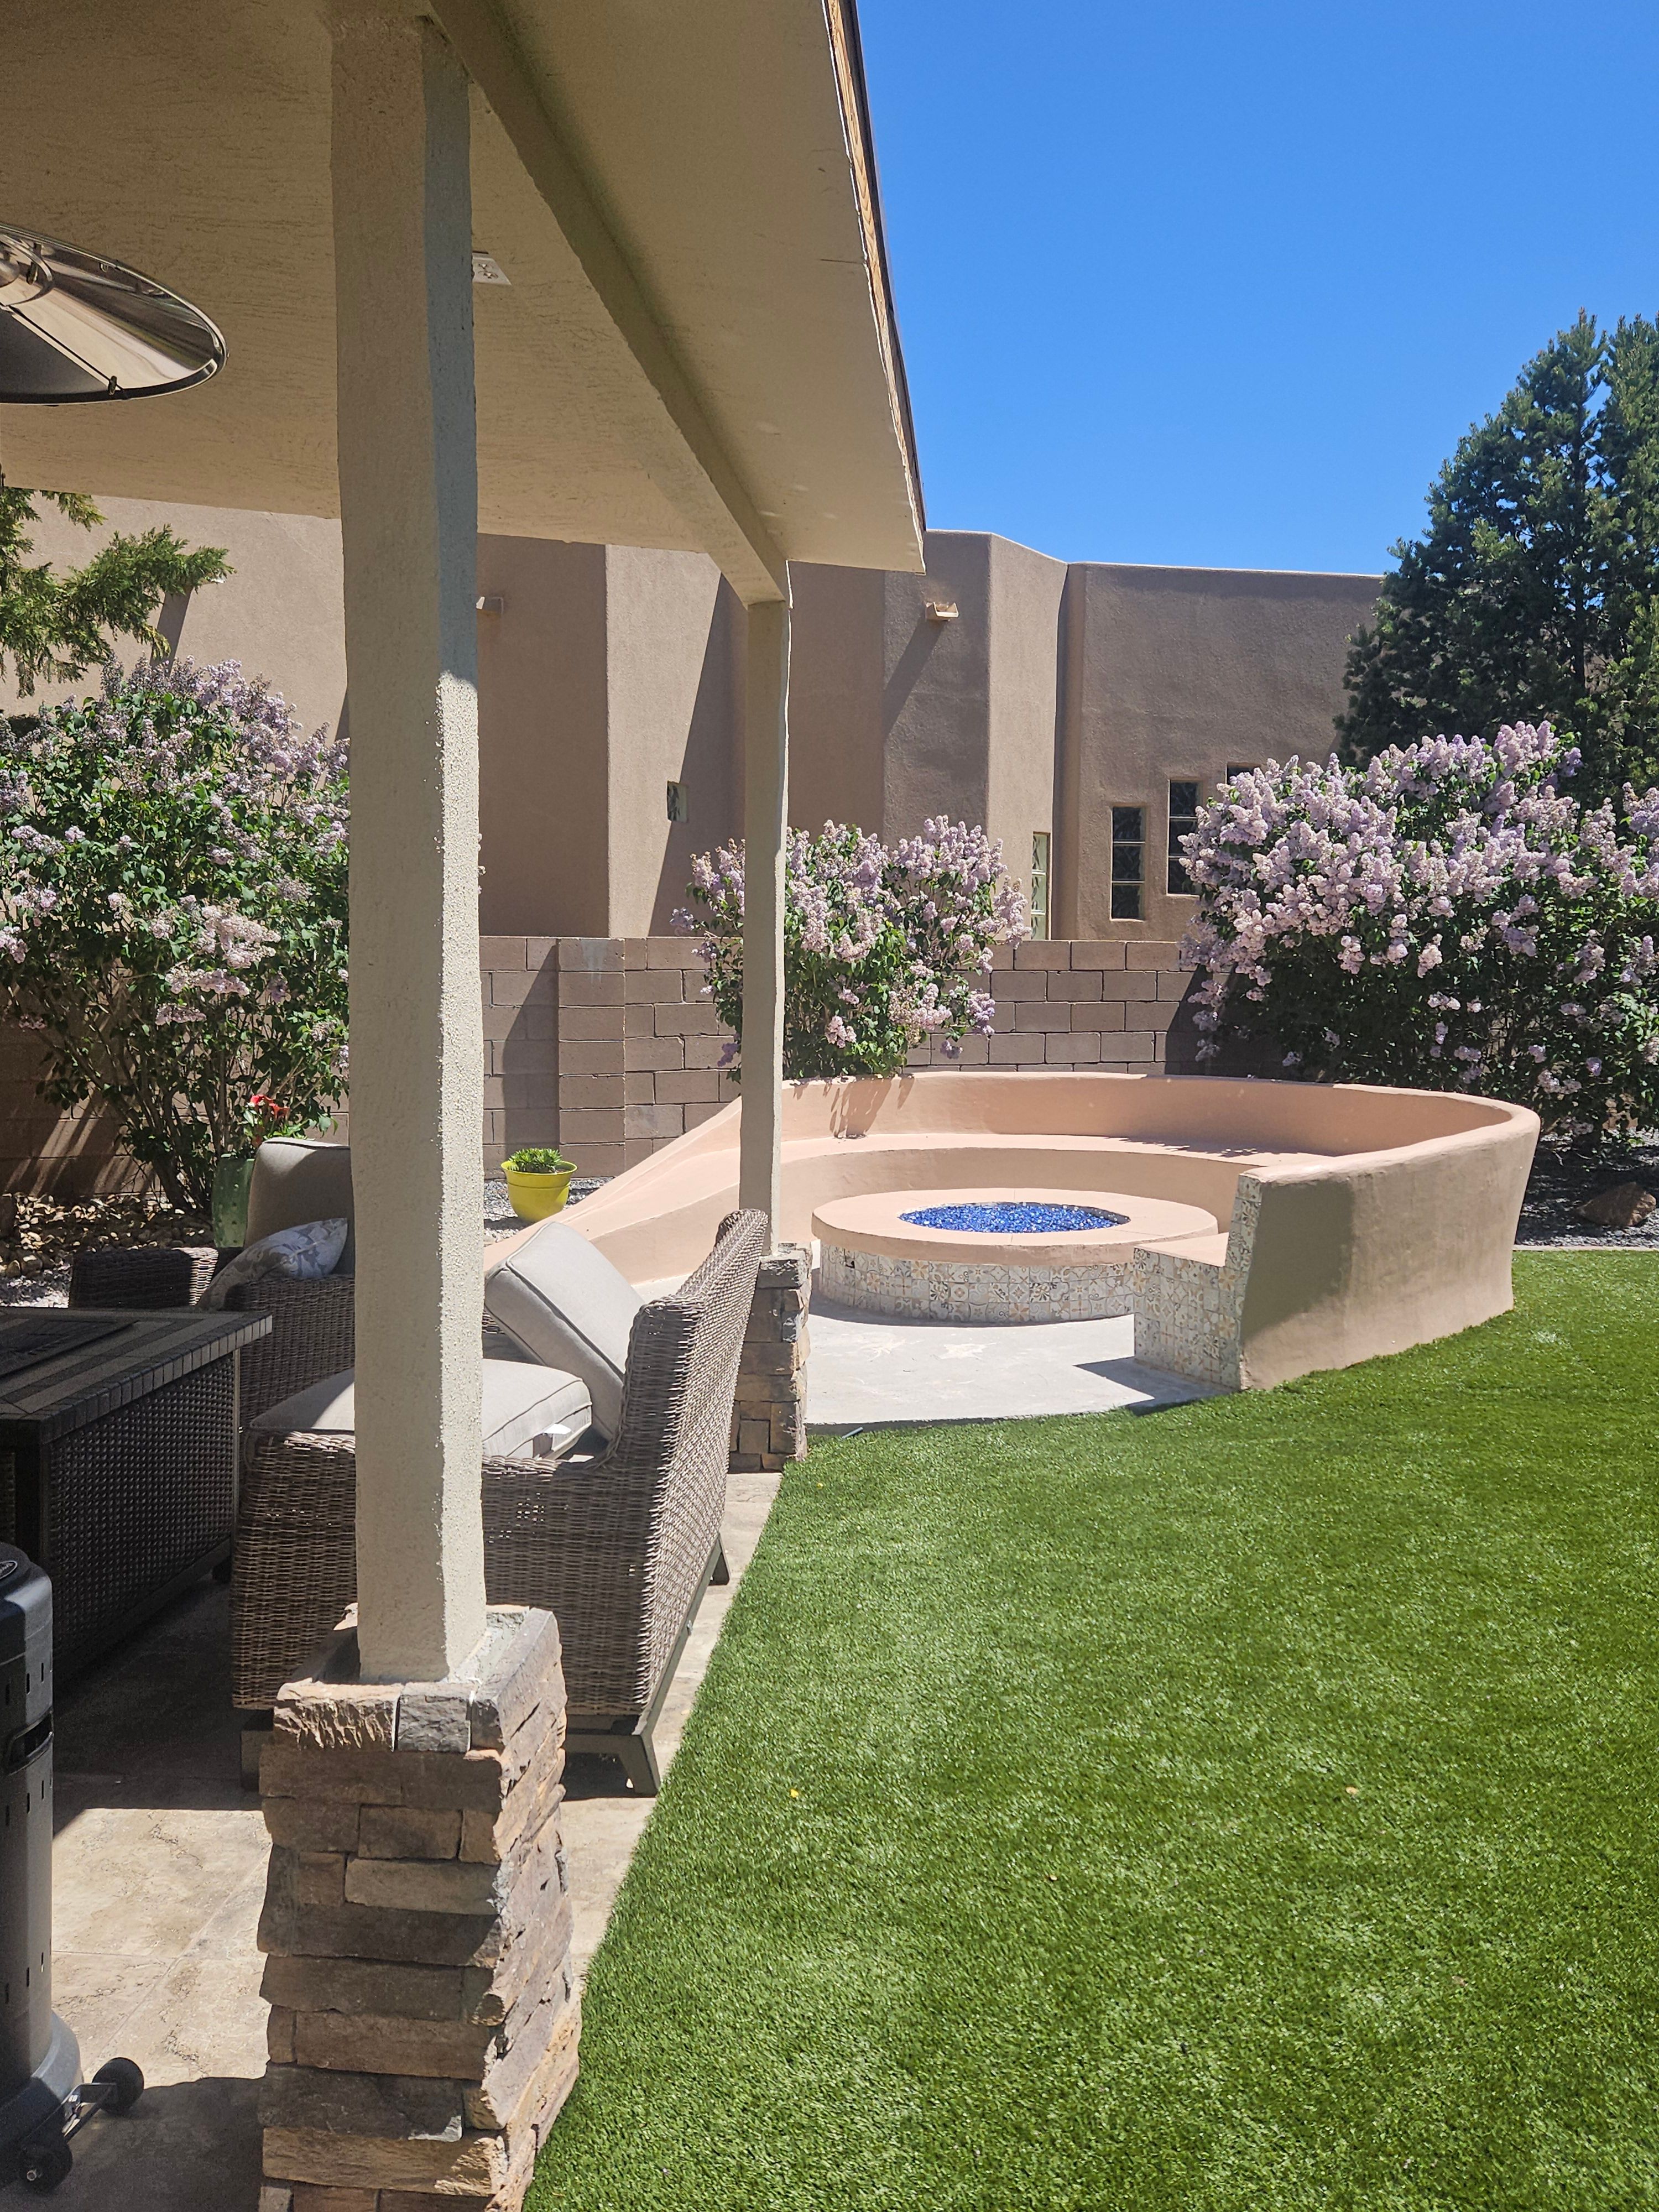 All Photos for RCB Landscape  in Rio Rancho, NM